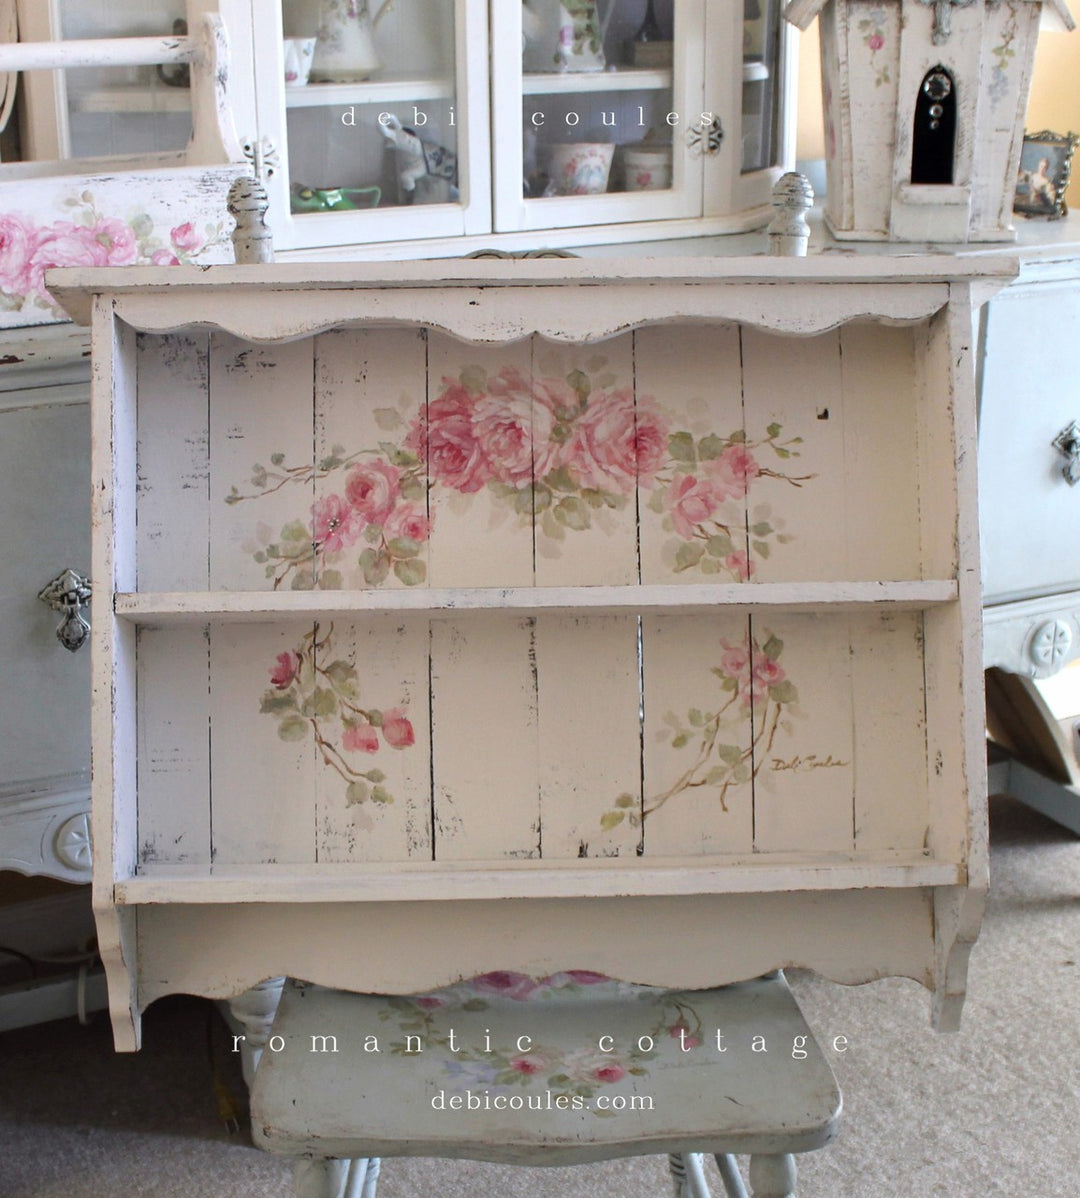 Special Order Decorative Shabby Chic Large Roses Shelf - Customs Colors